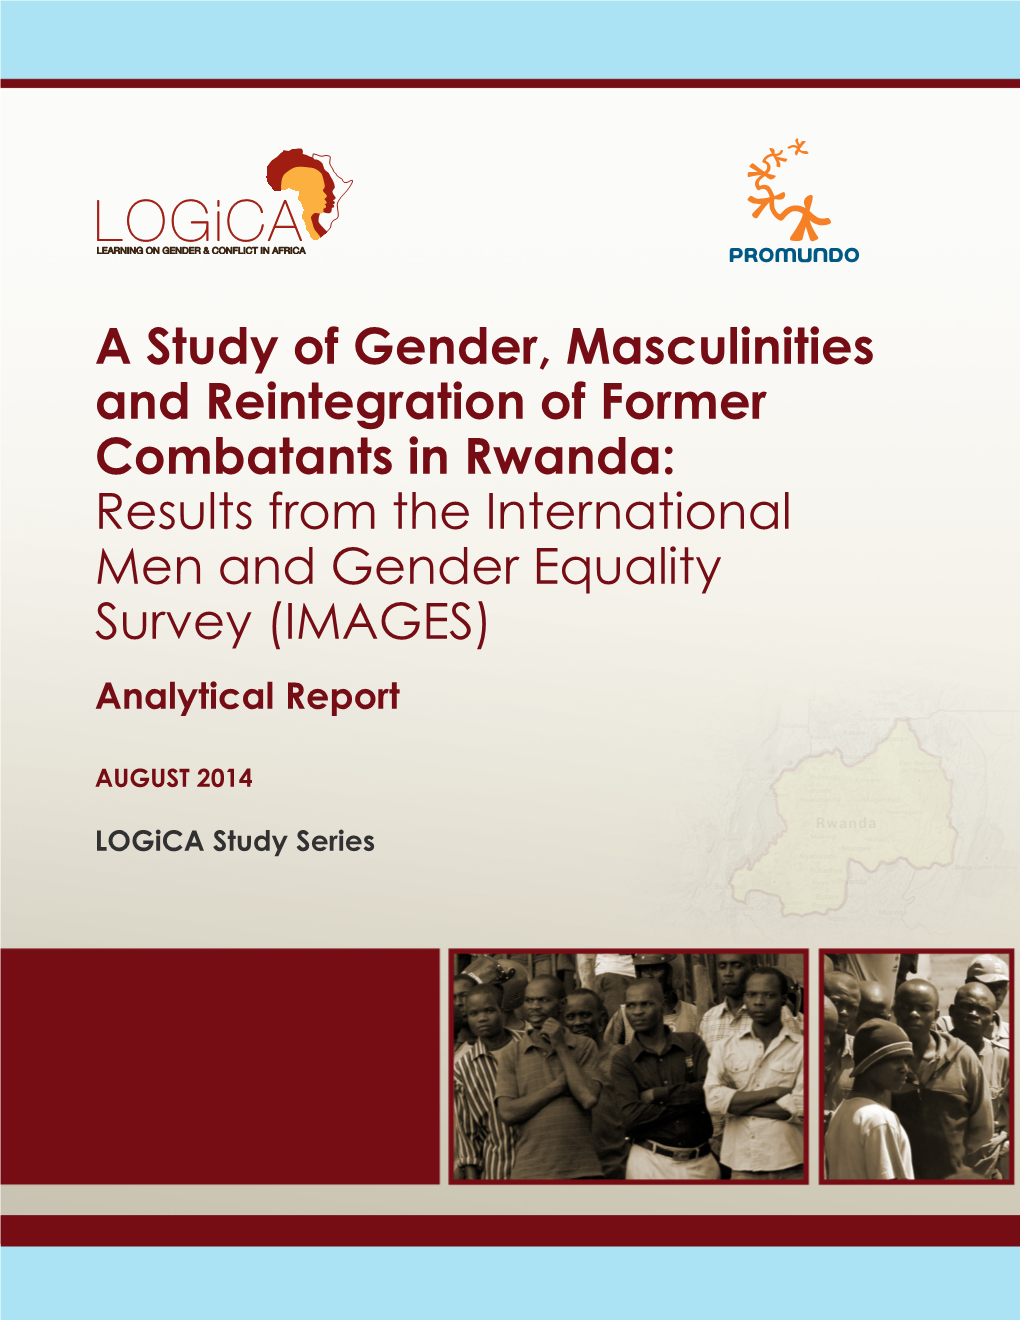 A Study of Gender, Masculinities and Reintegration of Former